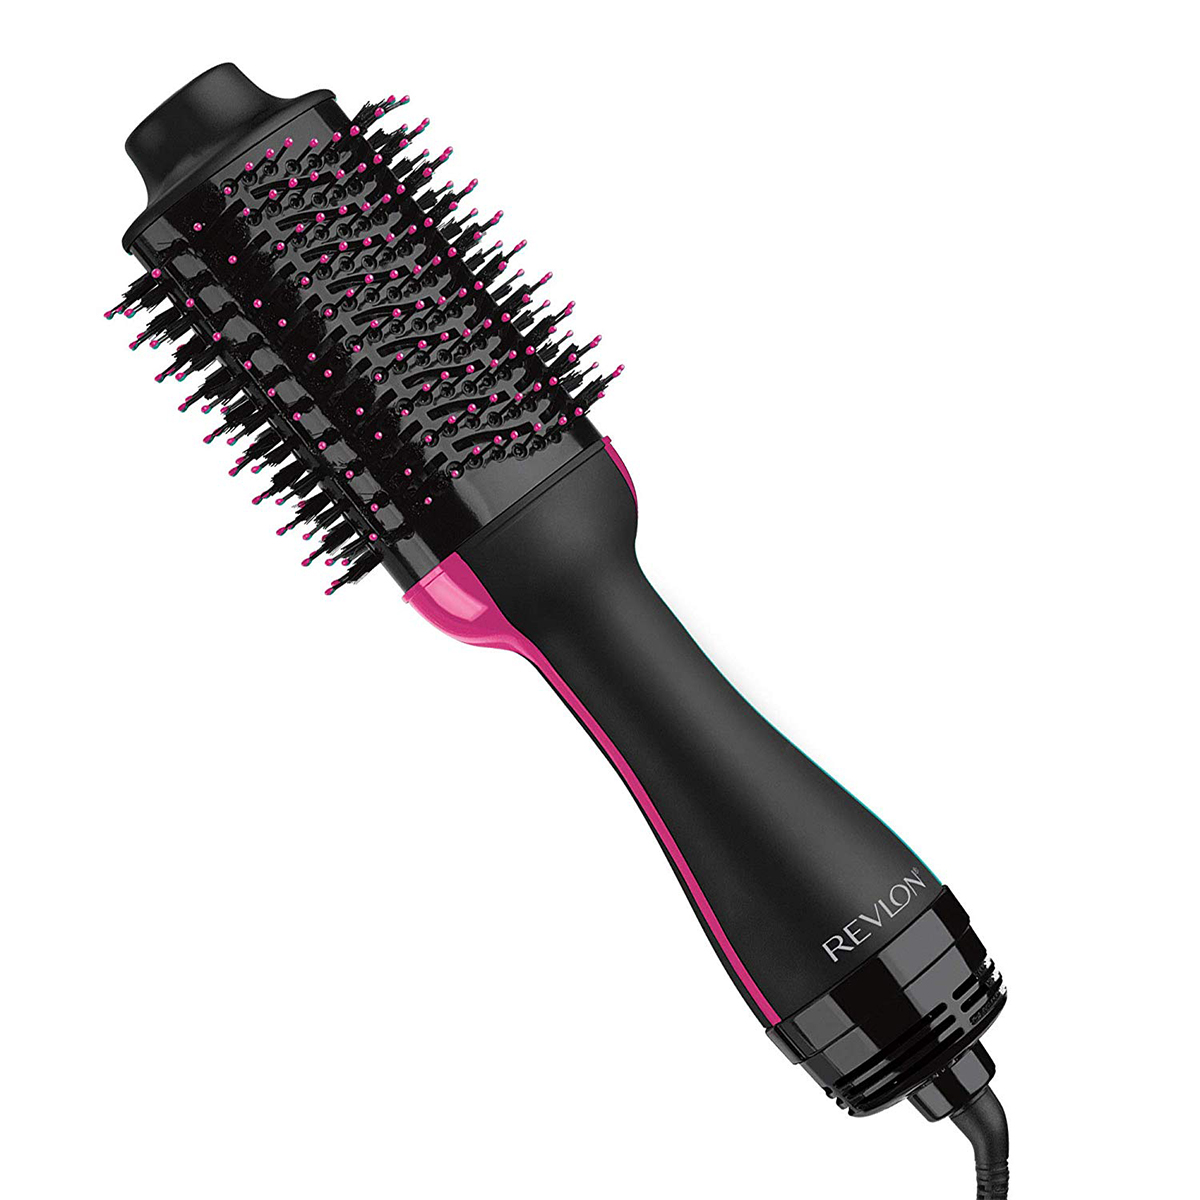 An Honest Review of Revlon's Blow-Dryer Brush | Who What Wear